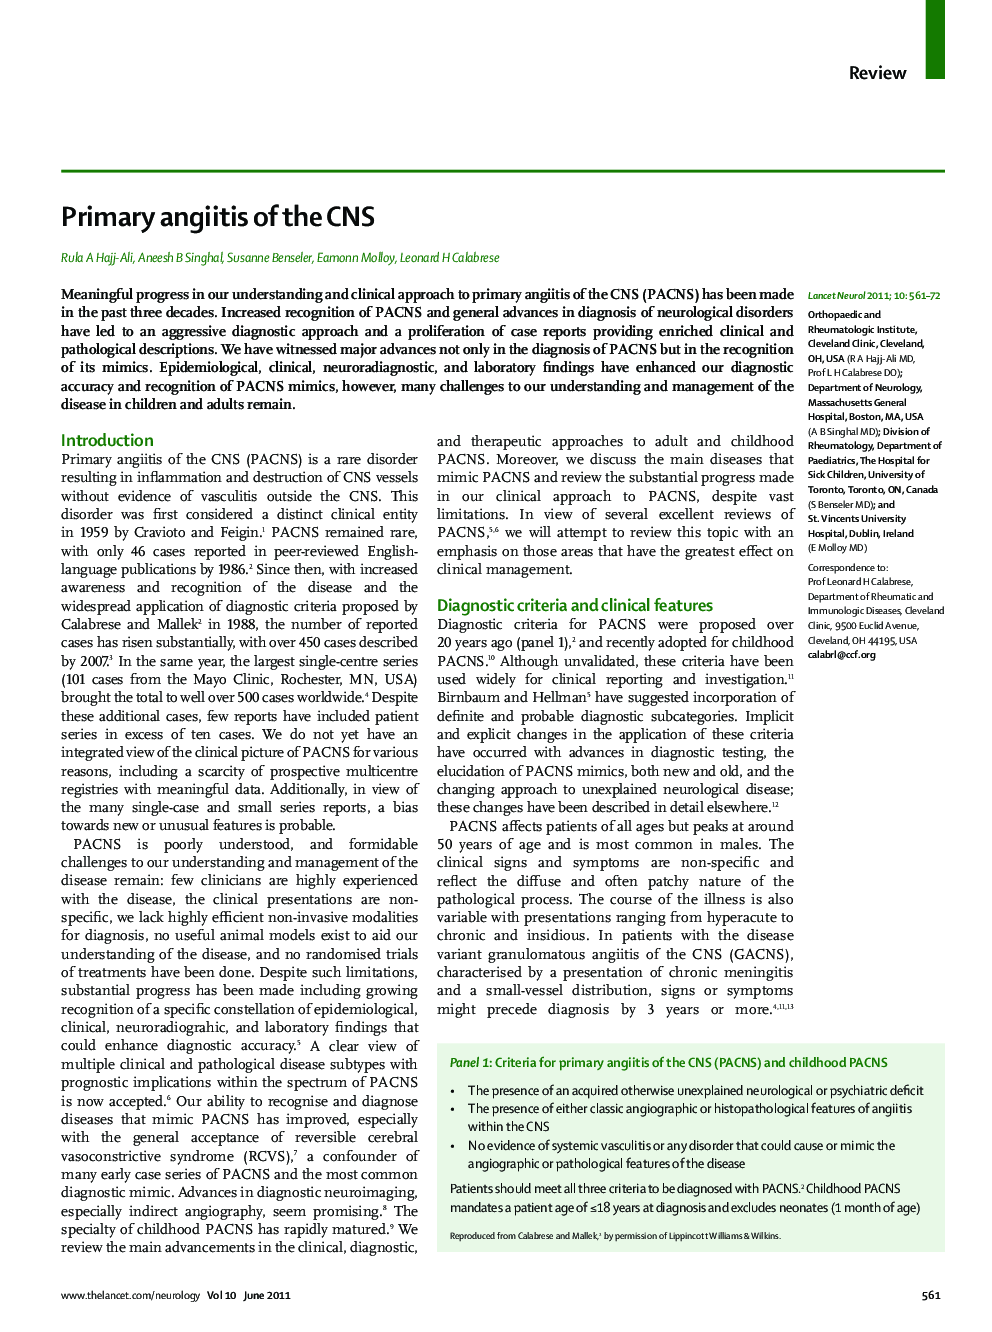 Primary angiitis of the CNS